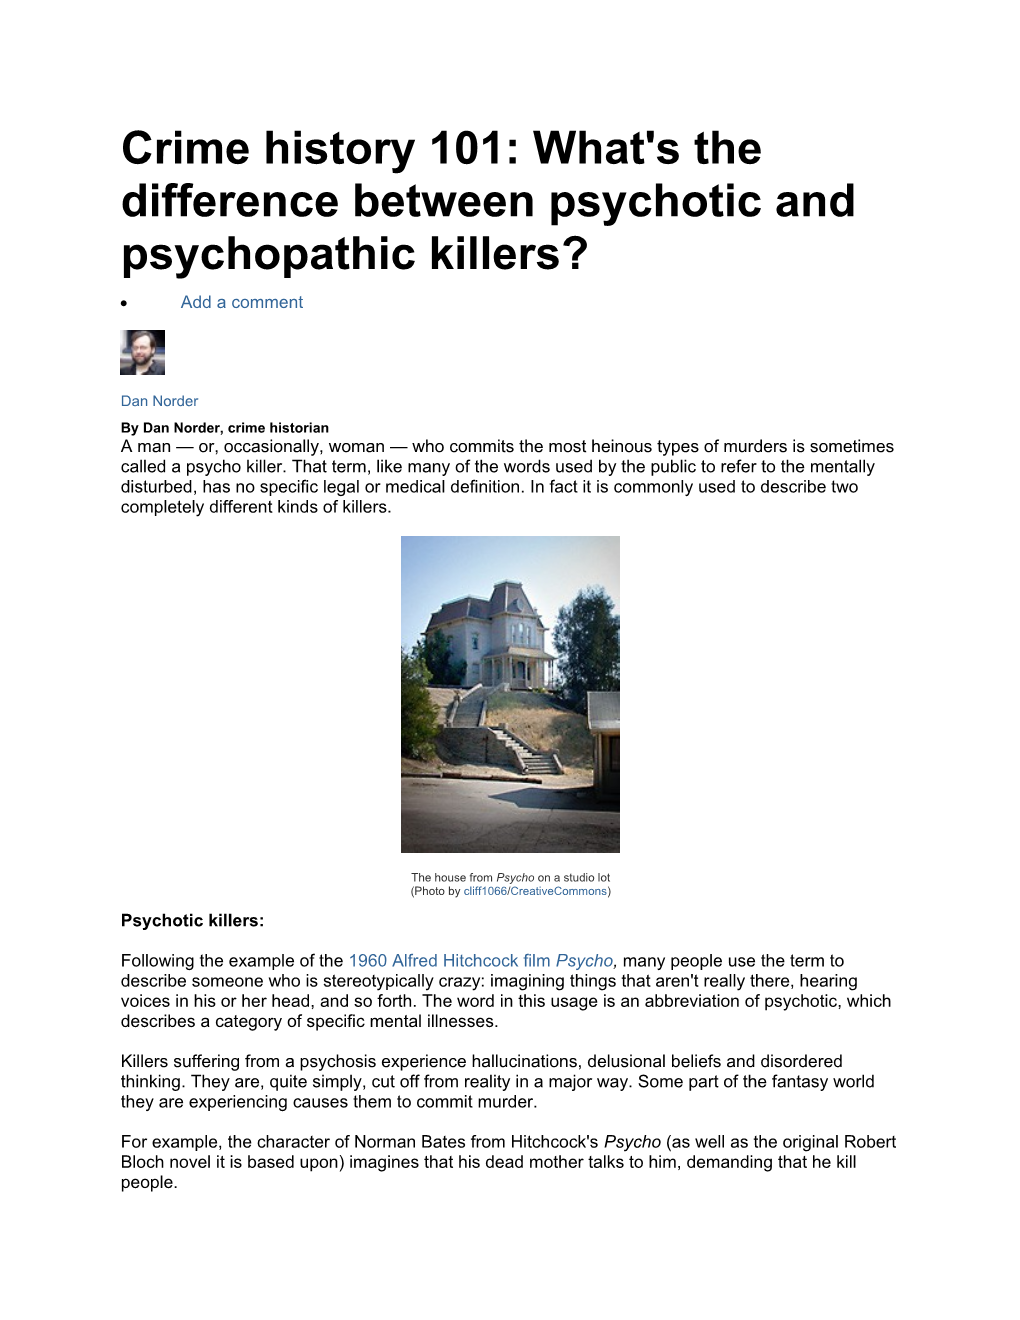 Crime History 101: What's the Difference Between Psychotic and Psychopathic Killers?